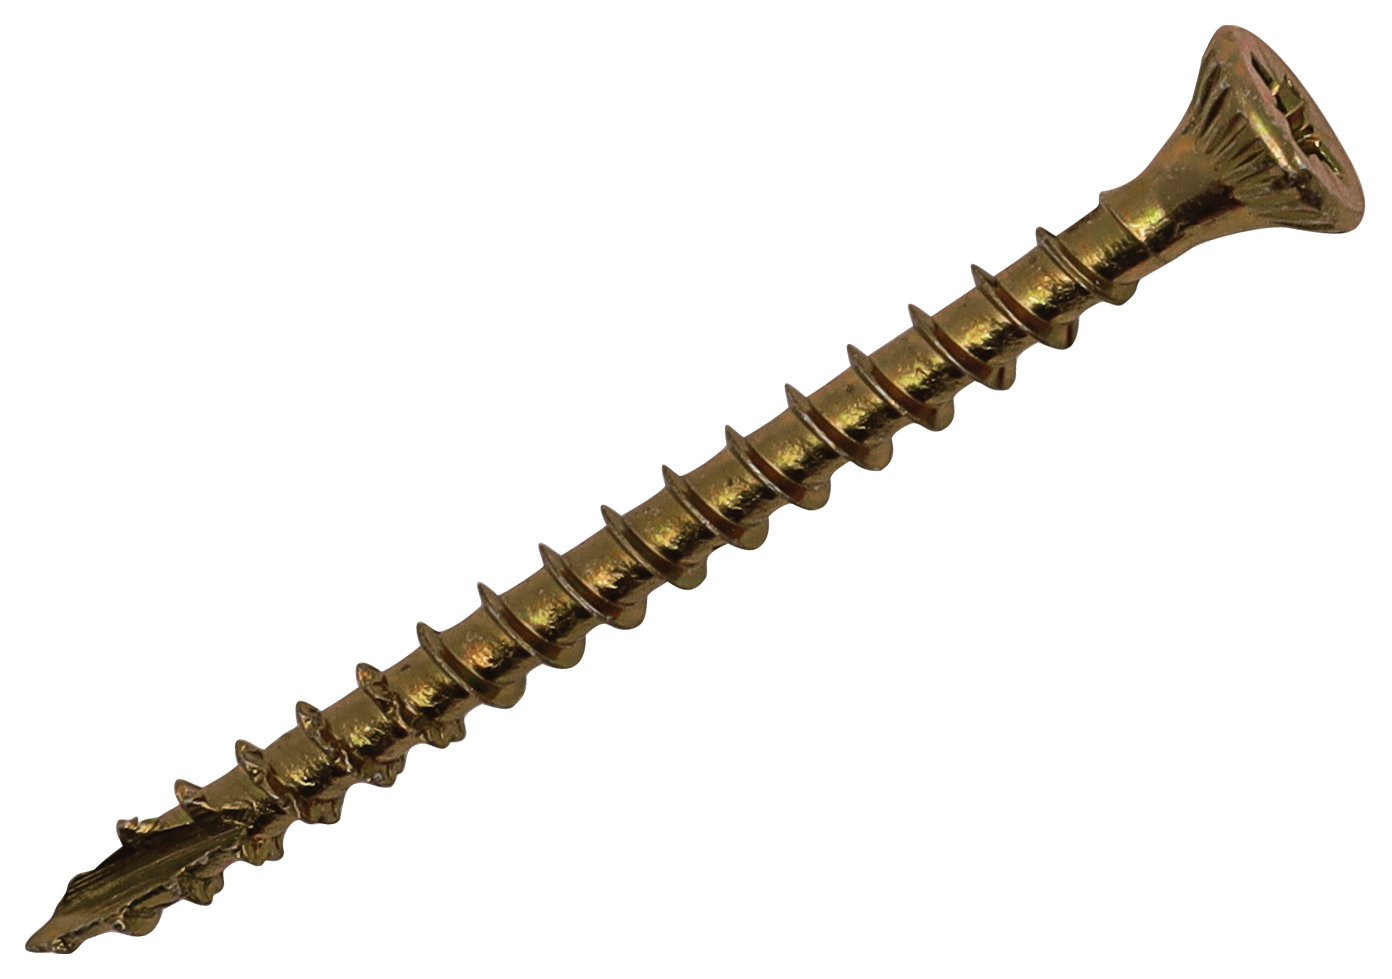 Optimaxx PZ Countersunk Passivated Double Reinforced Wood Screw - 4 x 50mm - Pack of 200